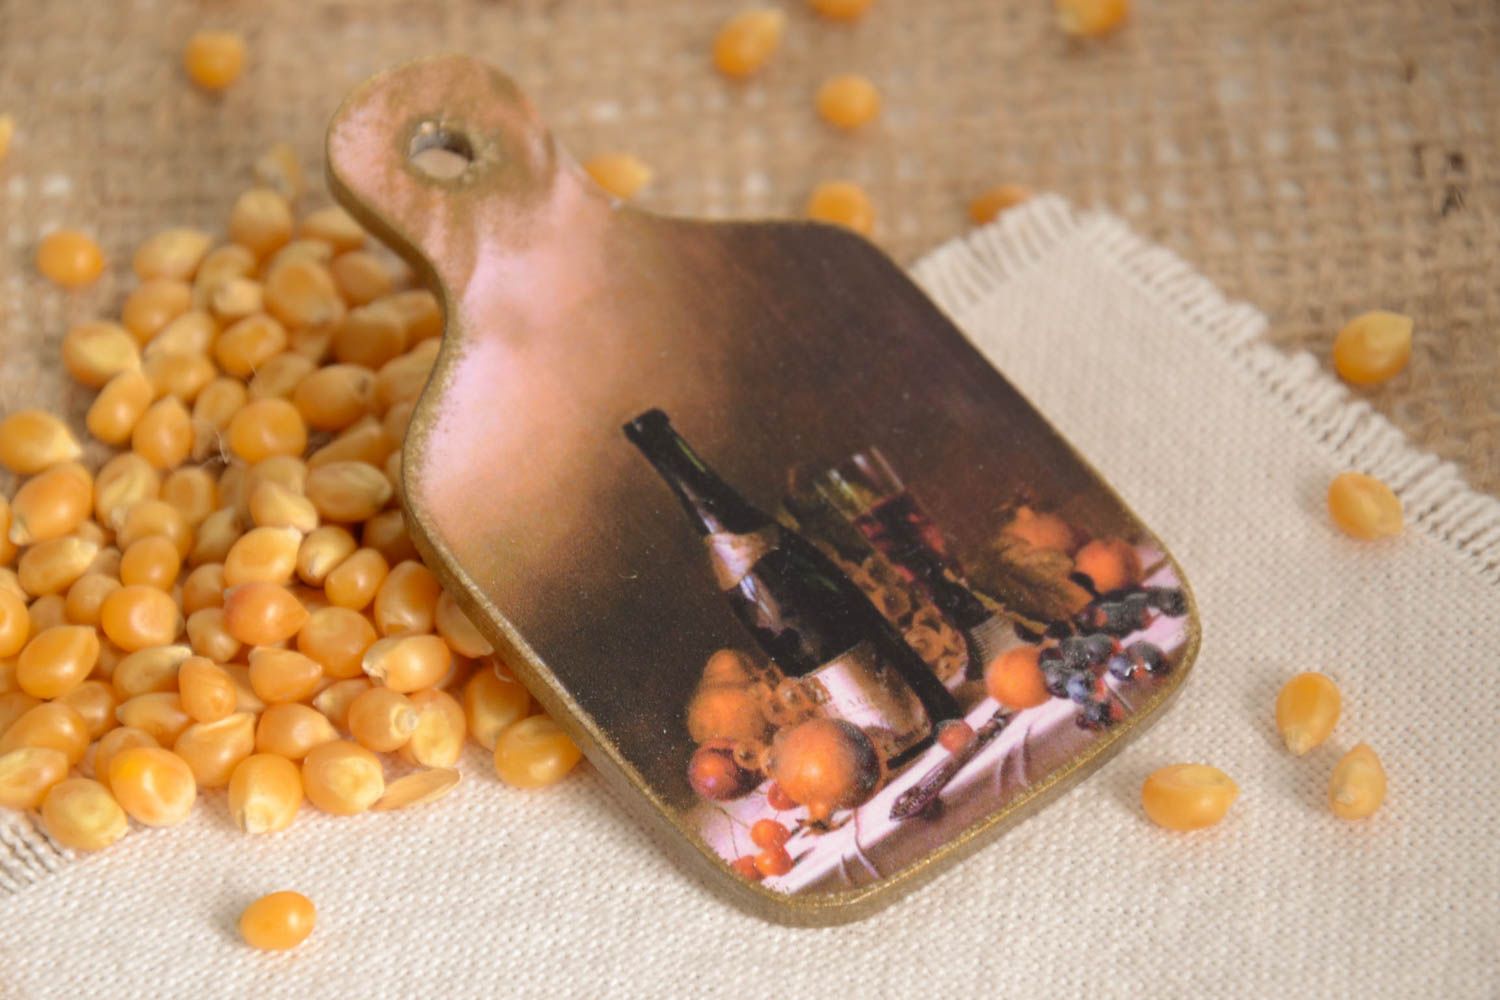 Small handmade fridge magnet kitchen supplies small gifts decorative use only photo 1